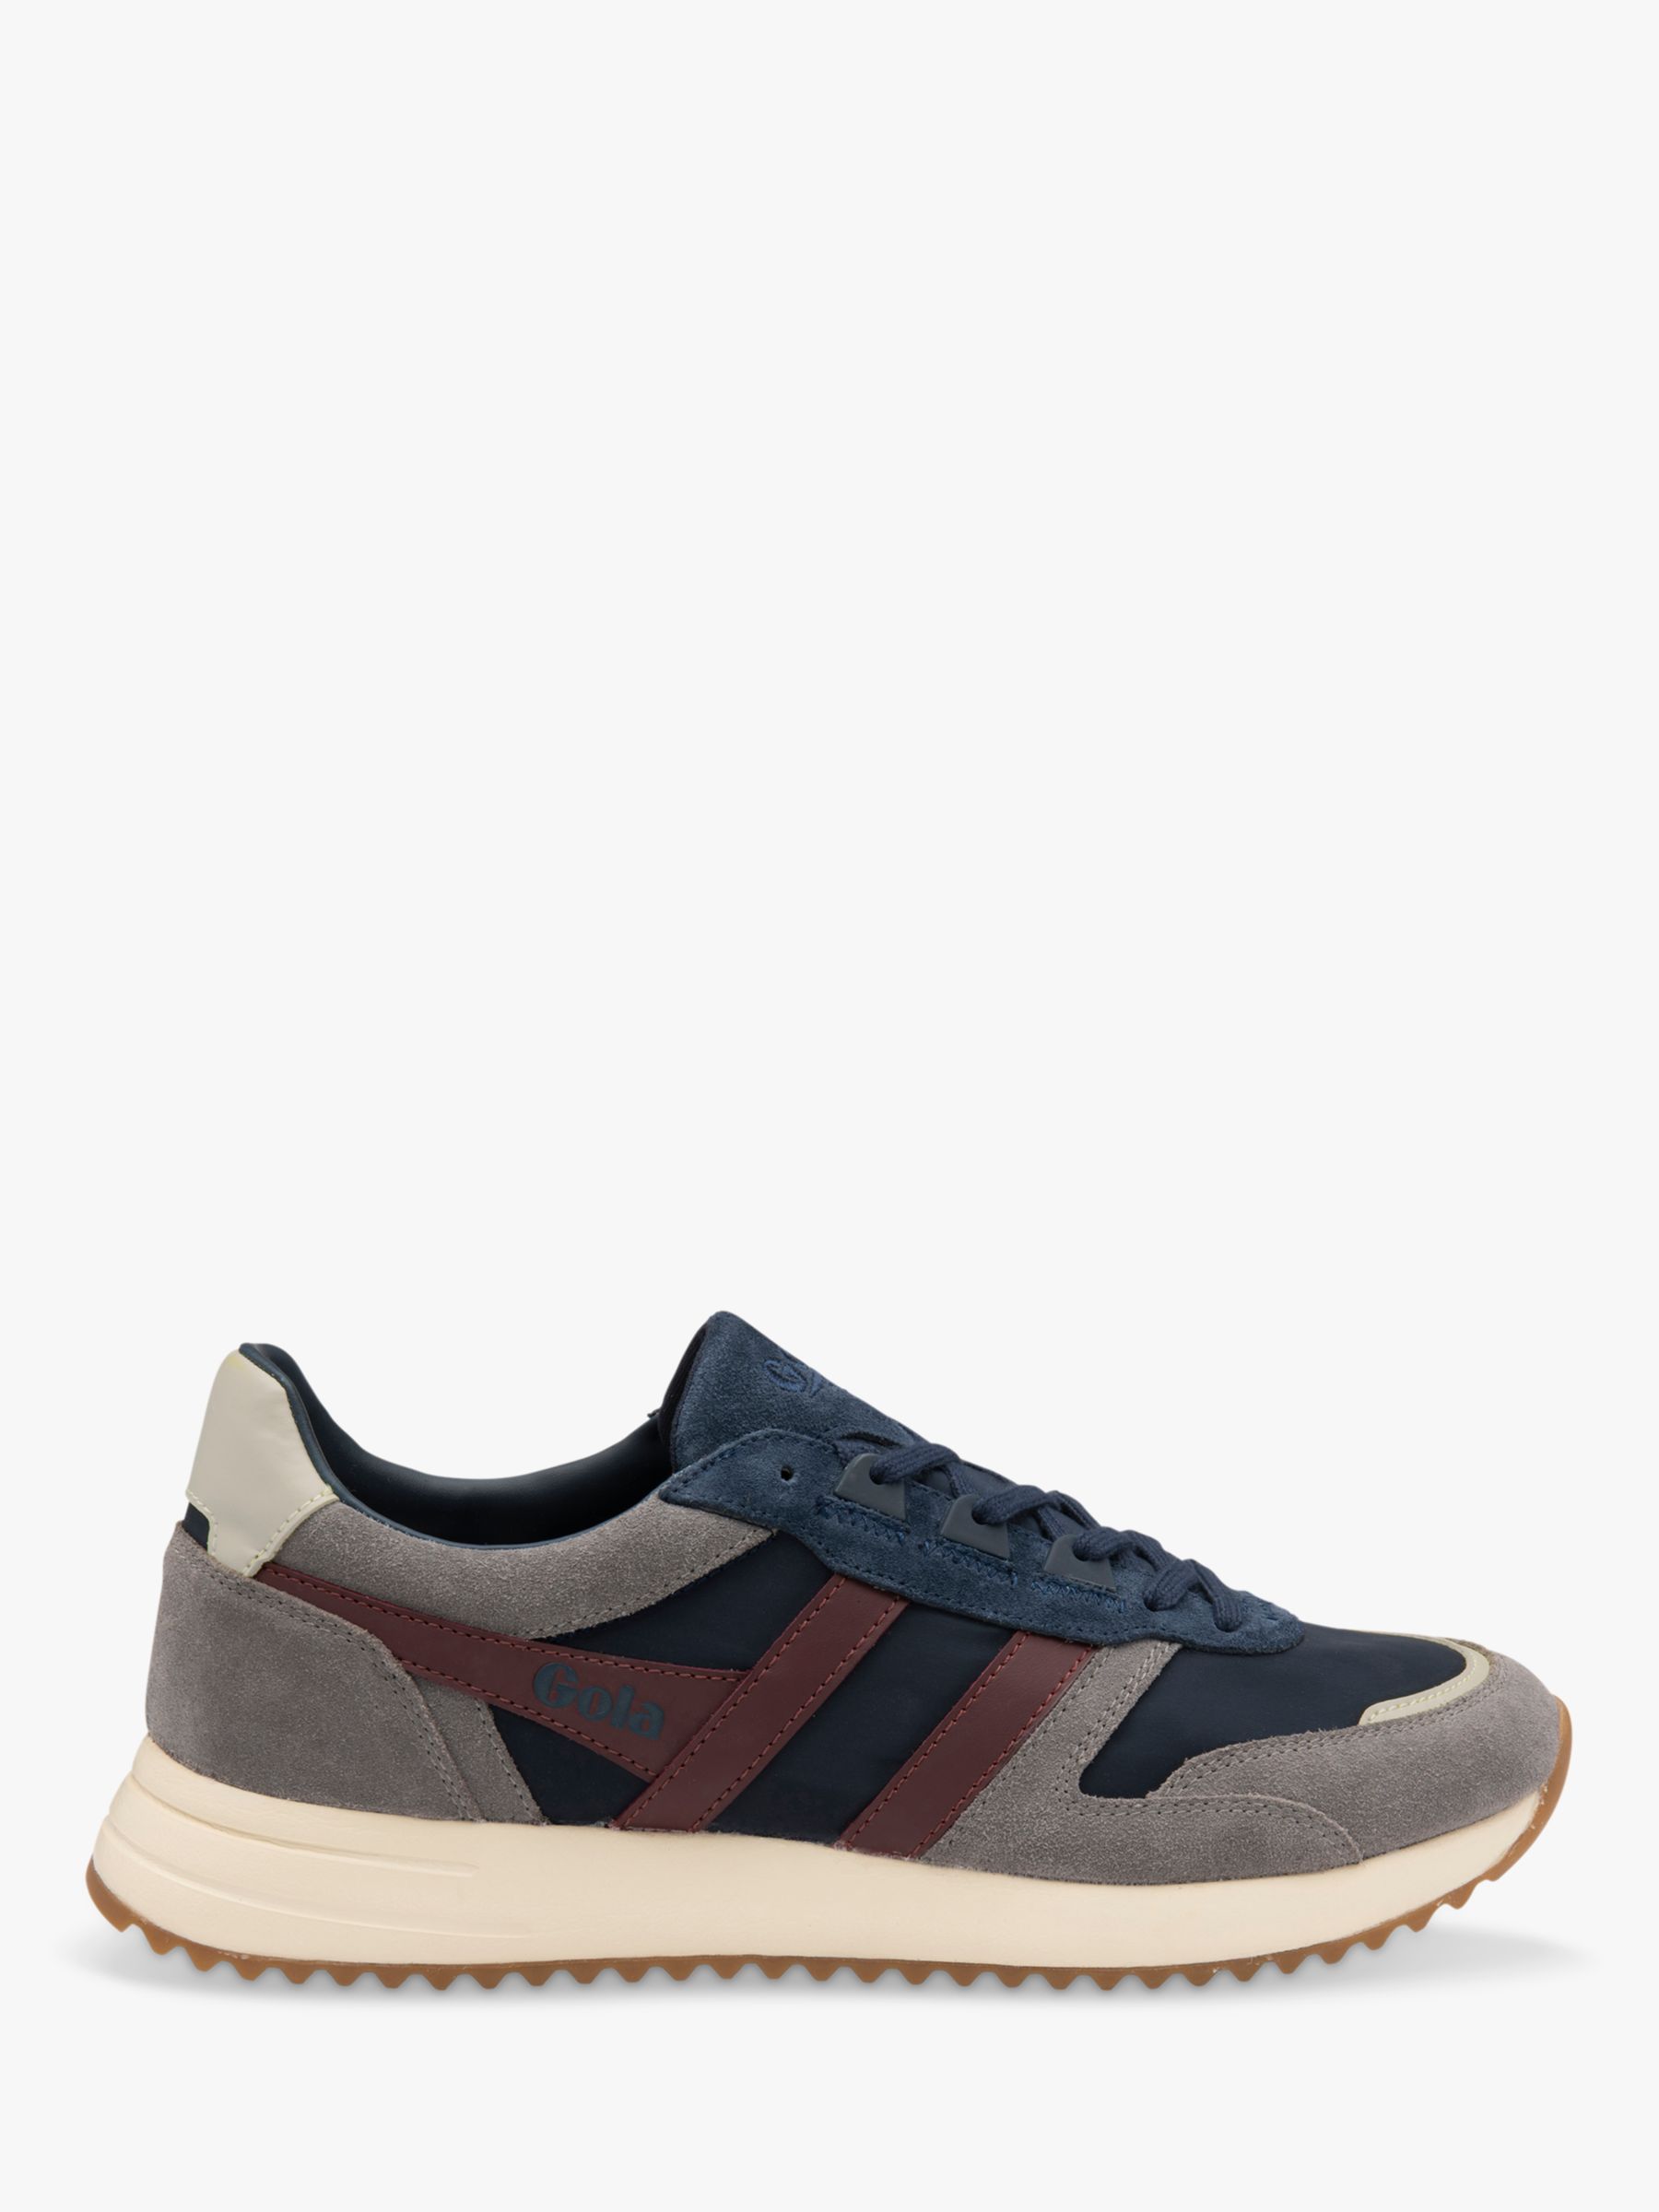 Gola Classics Chicago Lace Up Trainers, Grey/Navy, 6